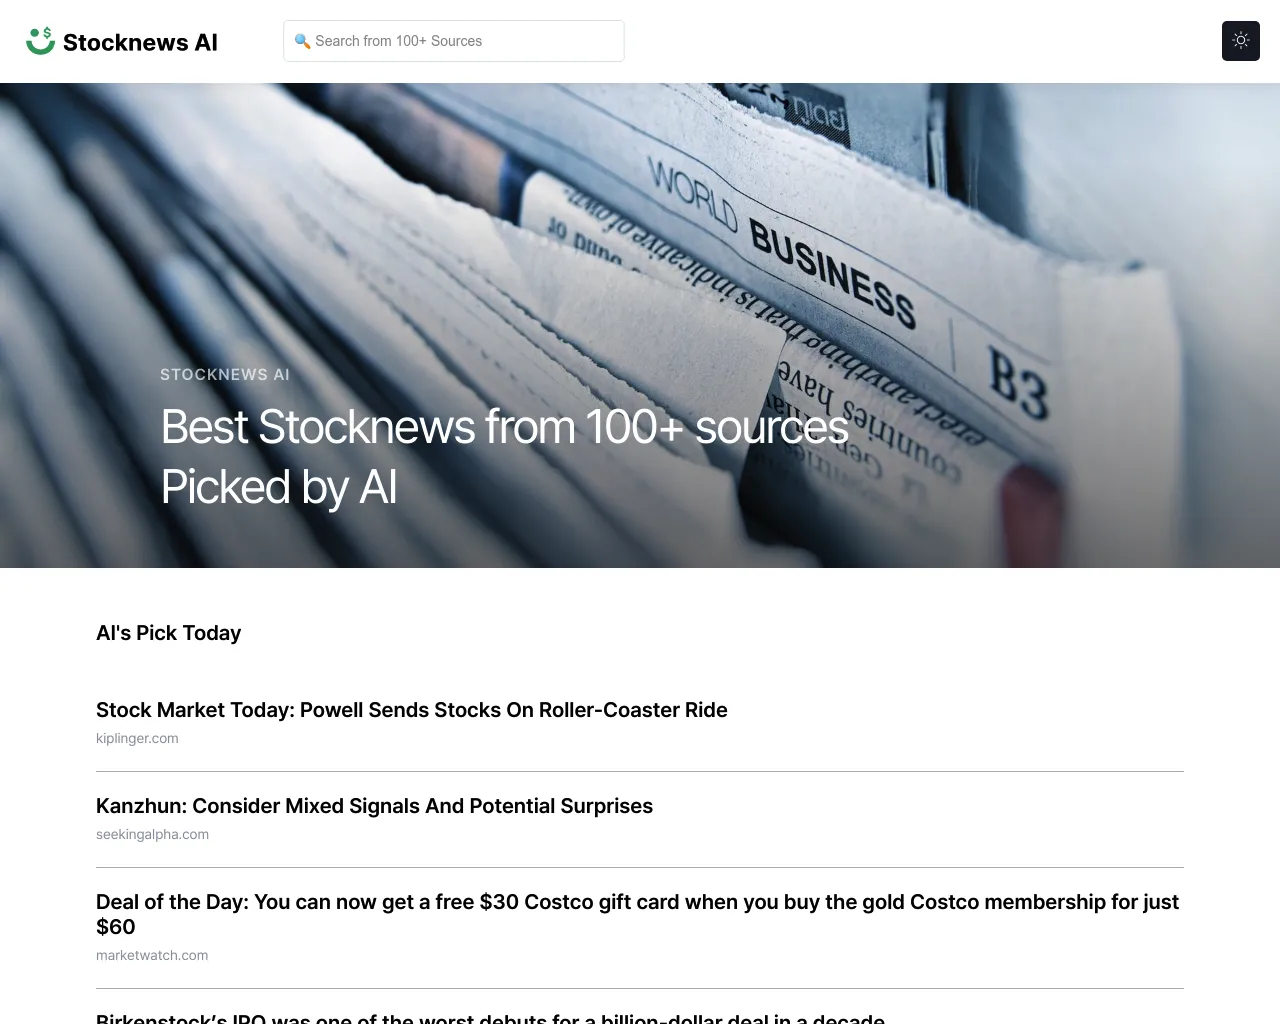 Best Stocknews from 100+ sources Picked by AI